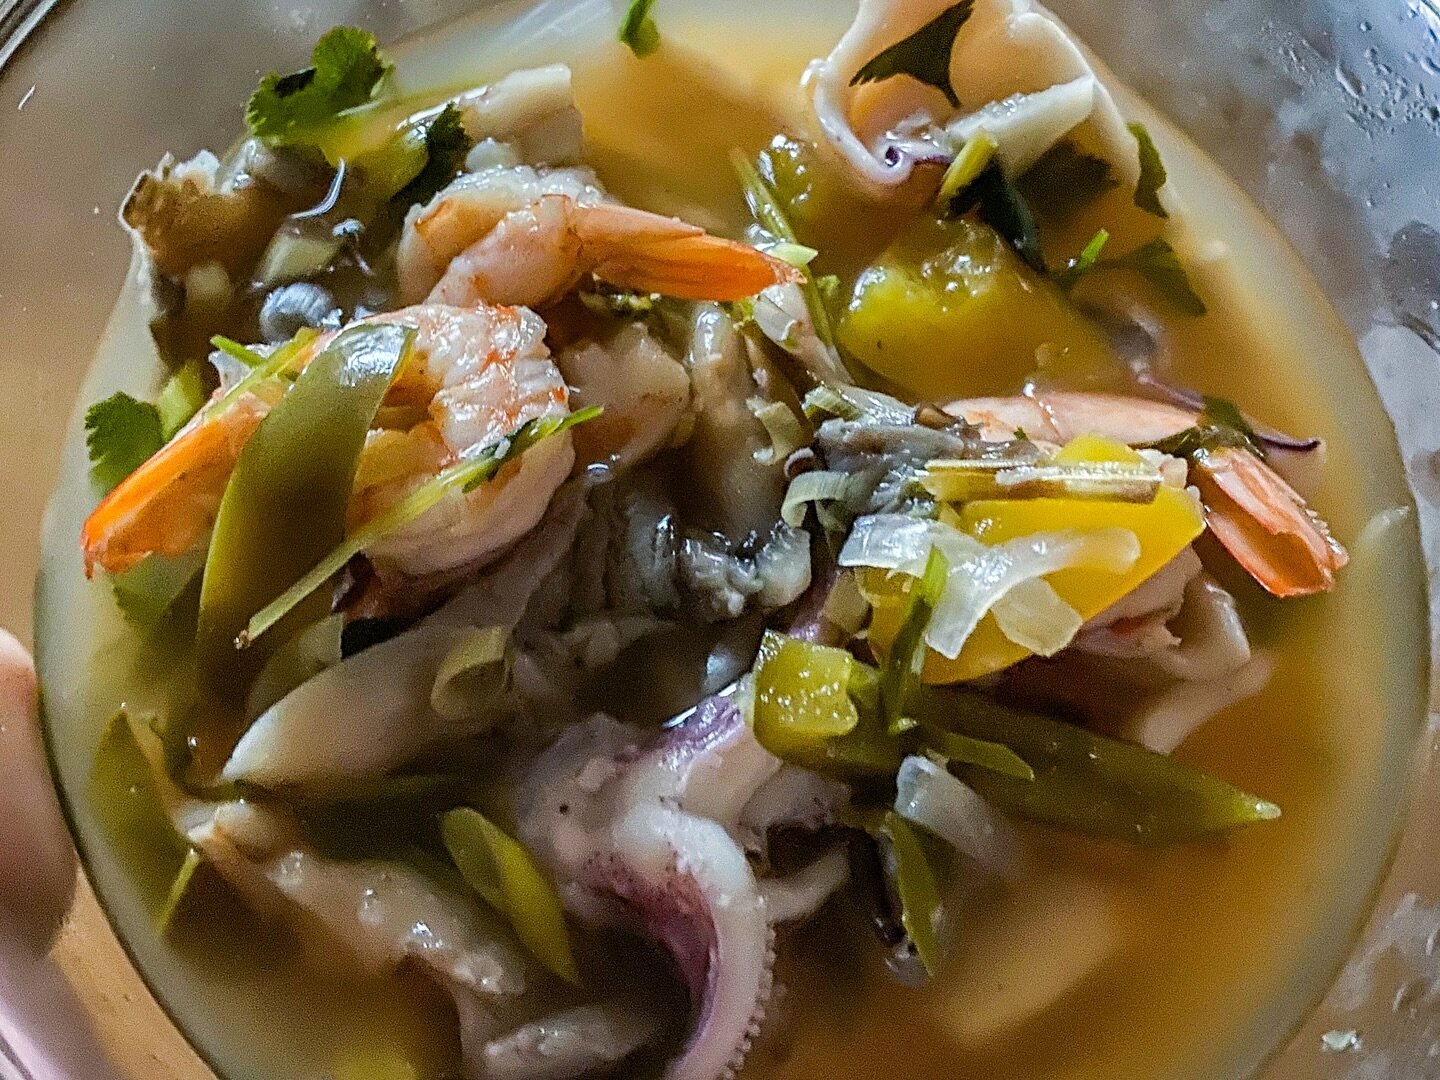 Mom made Tom Yum this week and dropped some off. It was so good!

#thaifood #thai #soup #tomyum #seafood